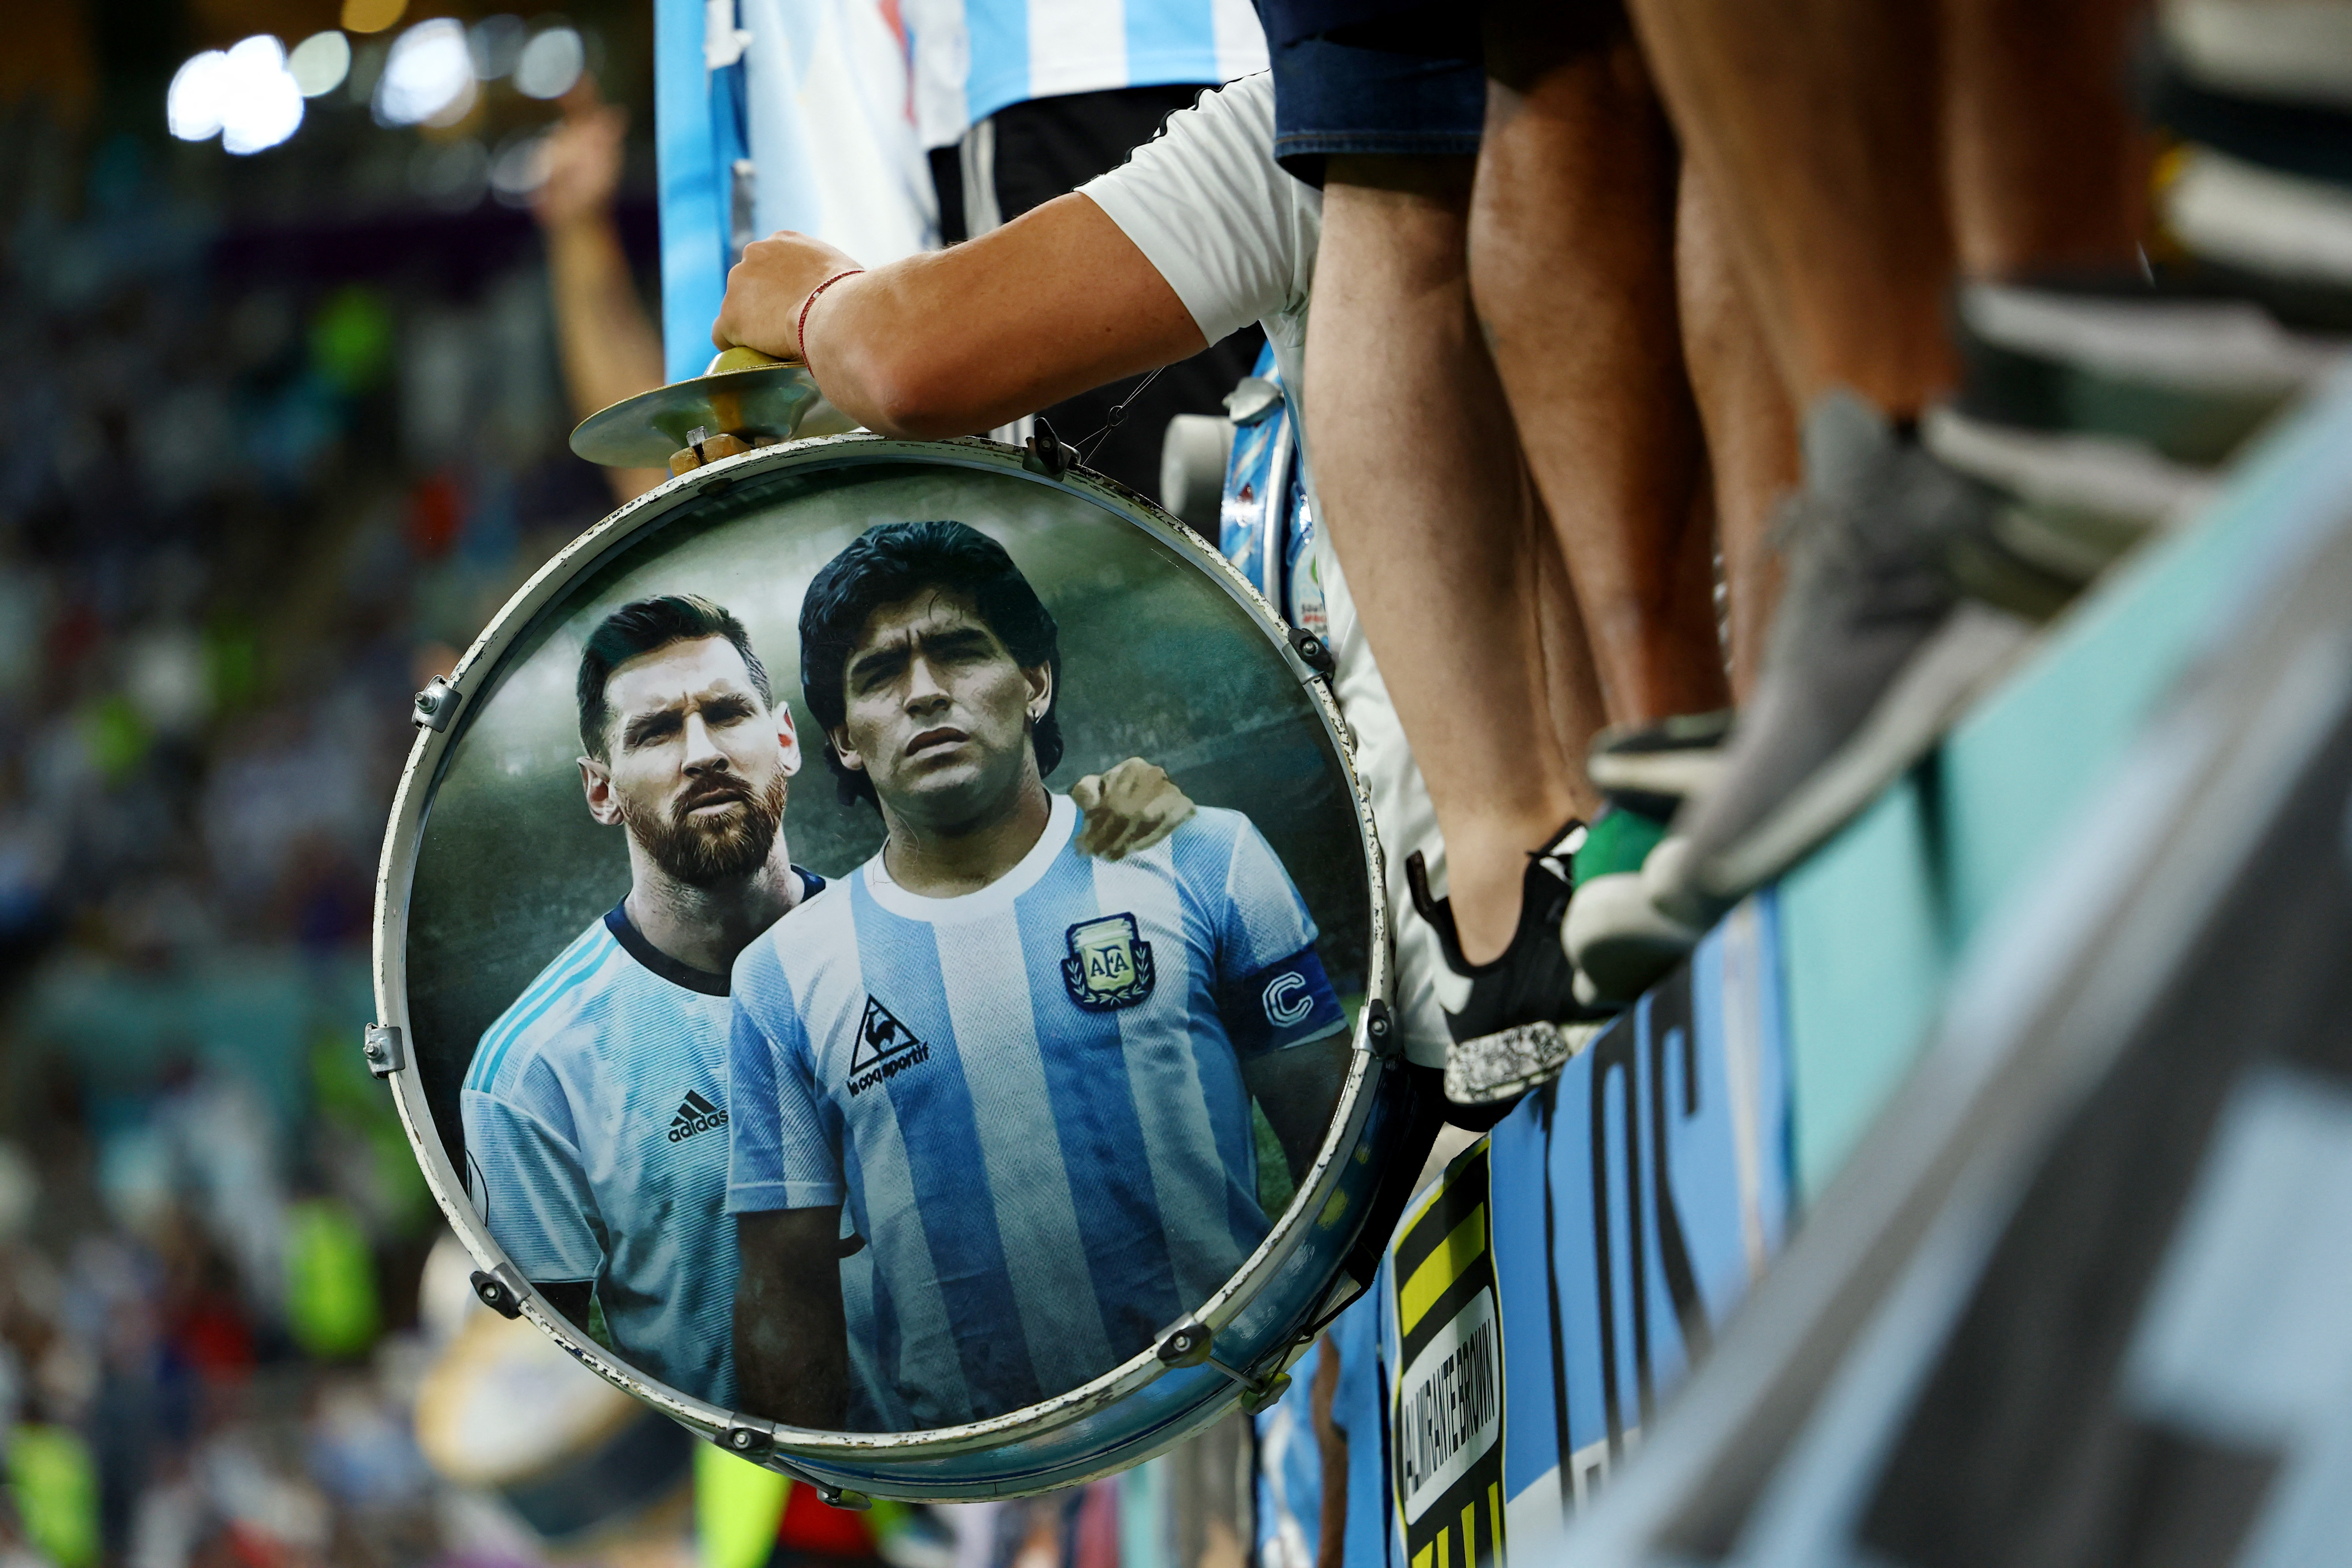 Soccer Football - FIFA World Cup Qatar 2022 - Quarter Final - Netherlands v Argentina - Lusail Stadium, Lusail, Qatar - December 9, 2022 Argentina's Lionel Messi and Diego Maradona are pictured in a fans drum inside the stadium before the match REUTERS/Molly Darlington